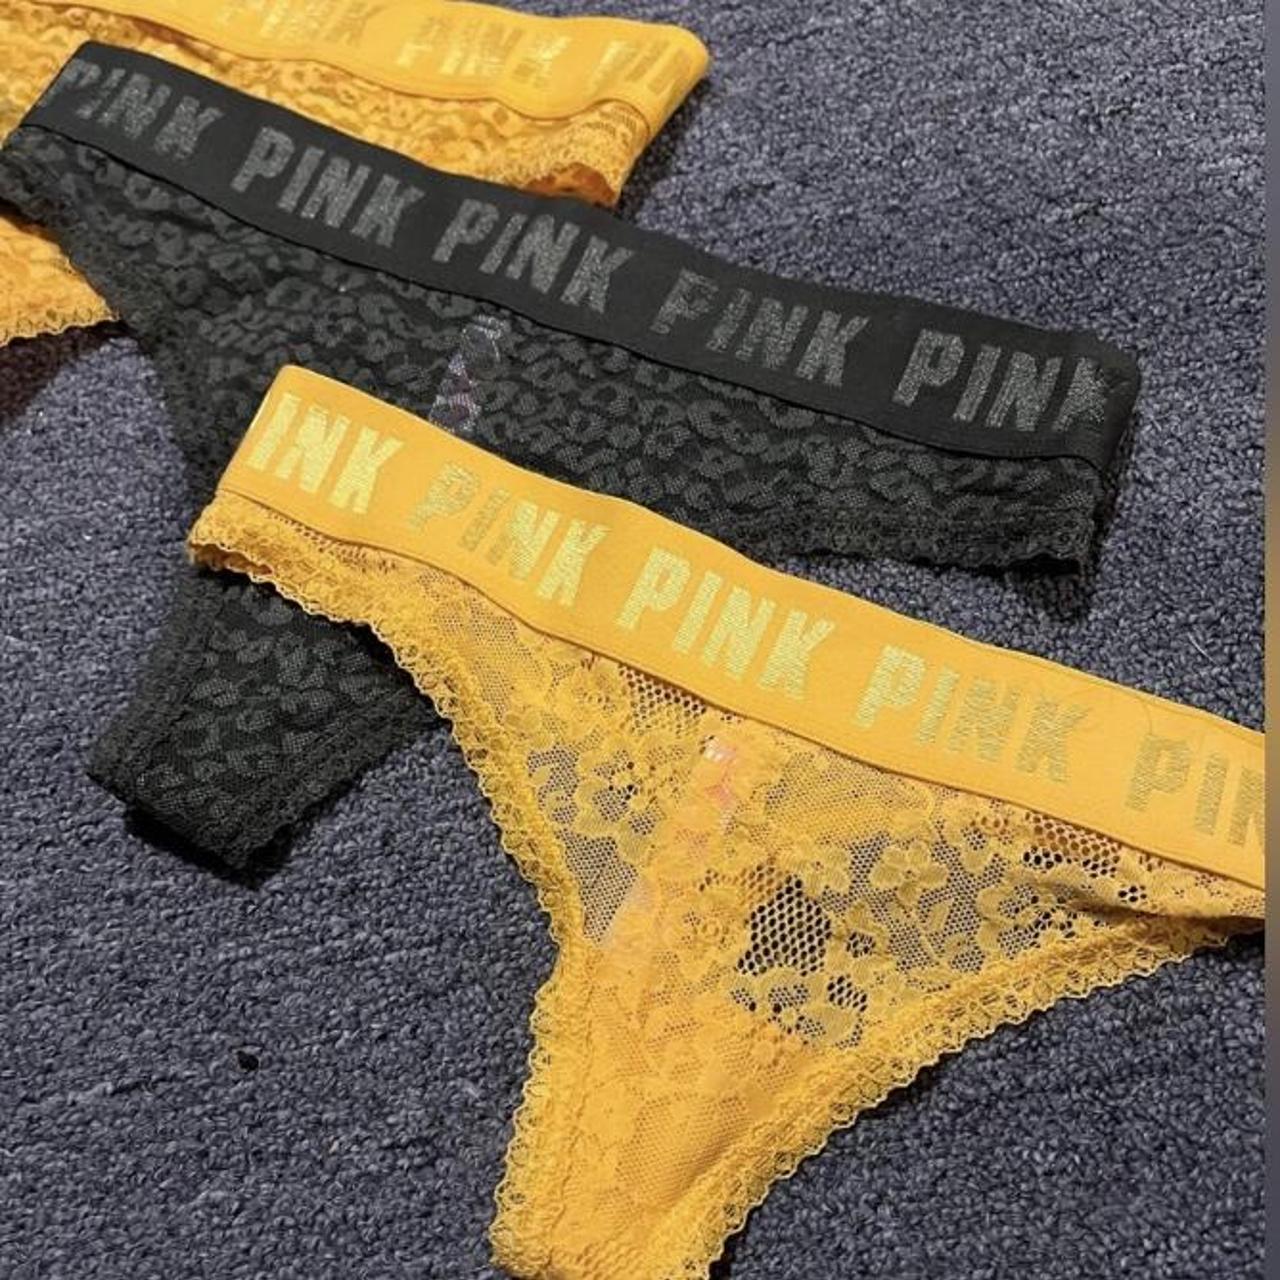 Victoria's Secret Pink Pink Lace Knickers